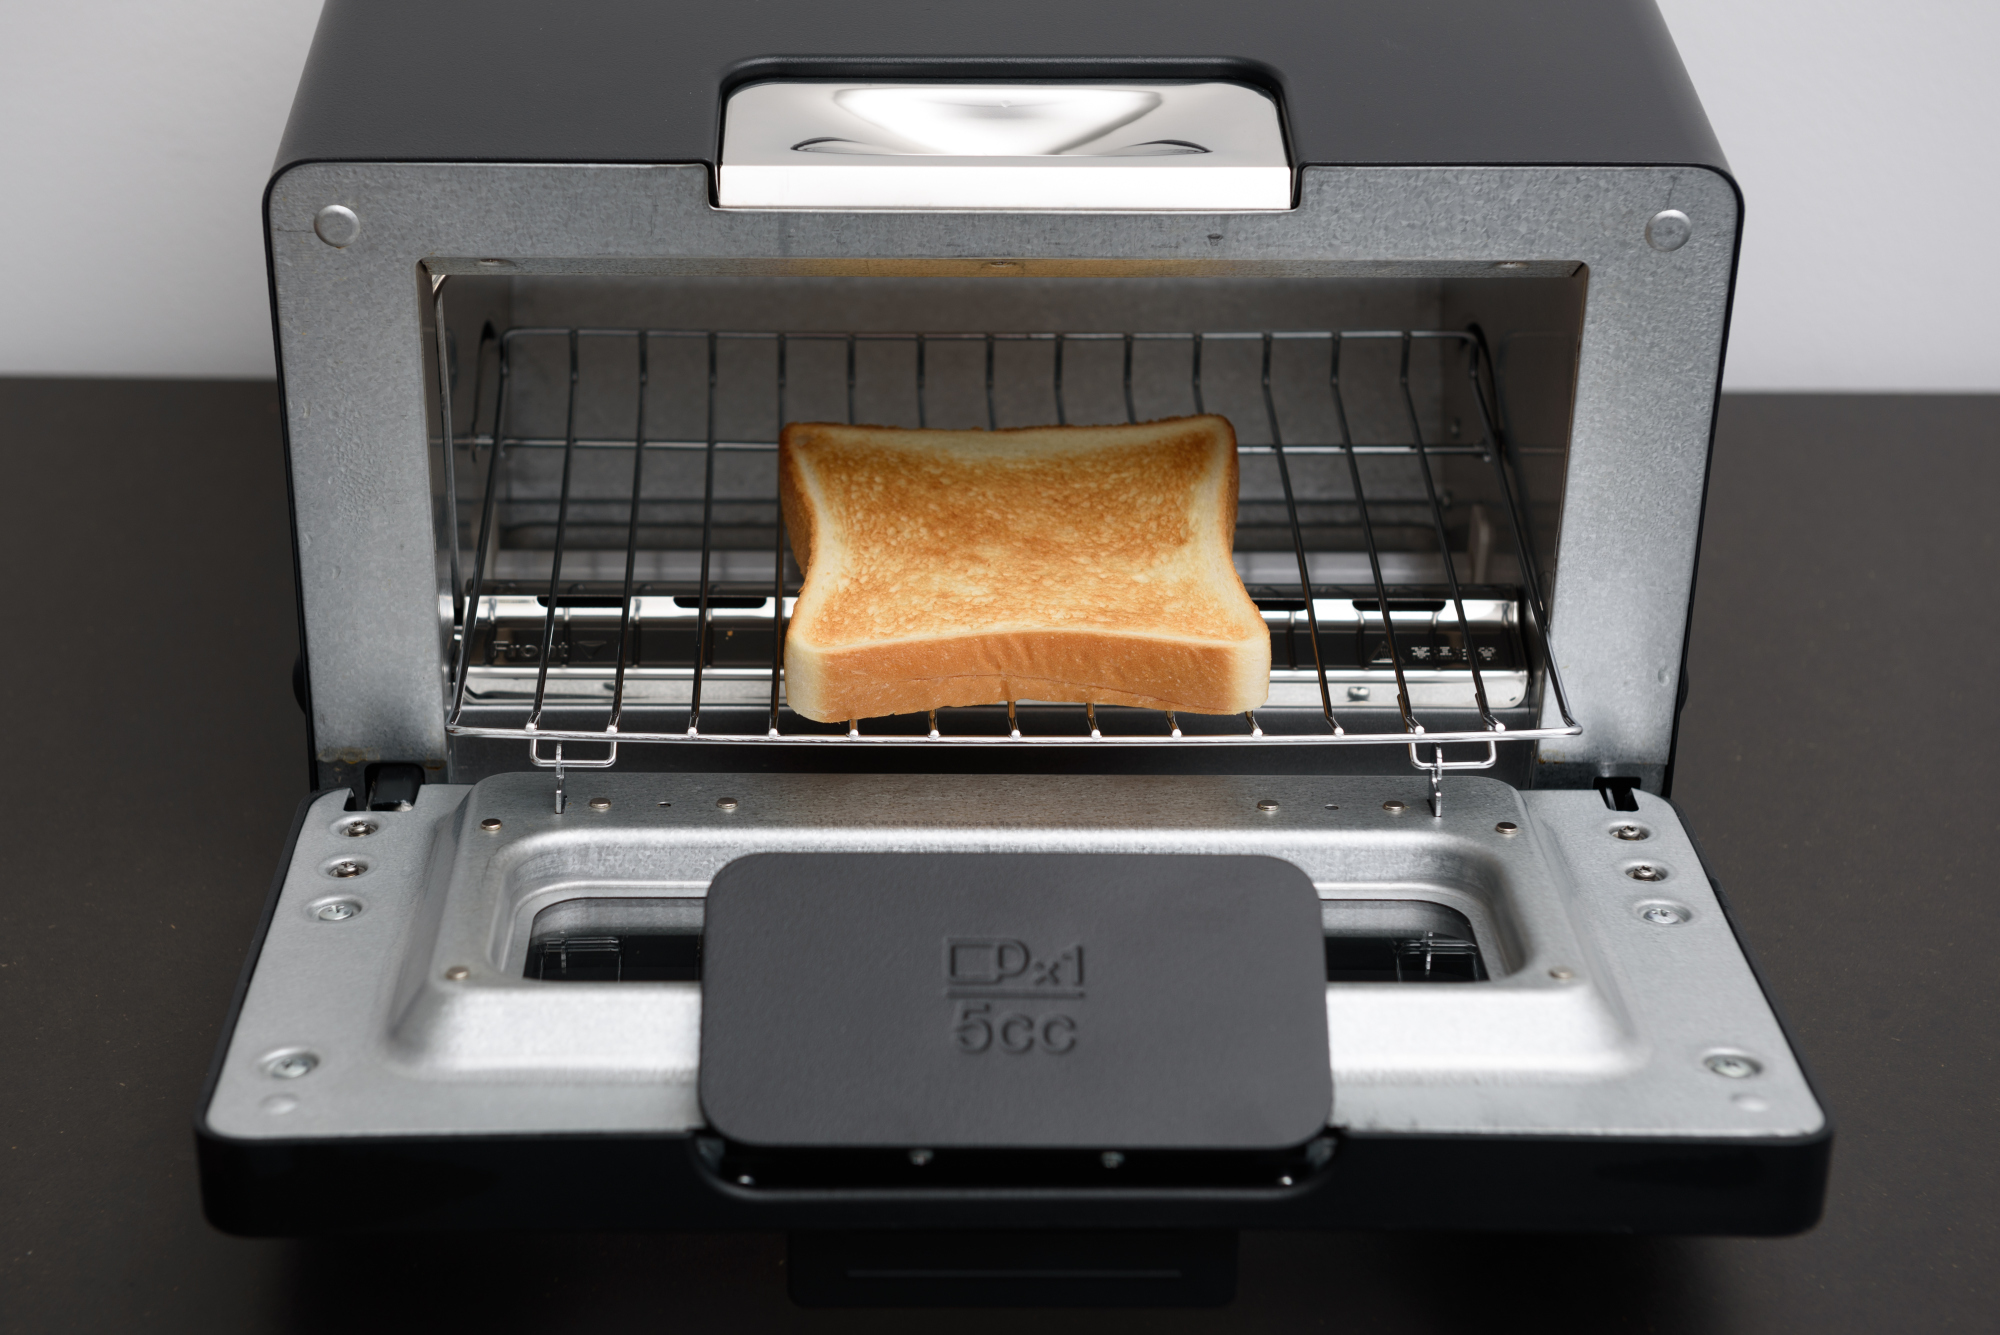 $230 Toaster Maker Balmuda Sees Shares Double in Trading Debut - Bloomberg